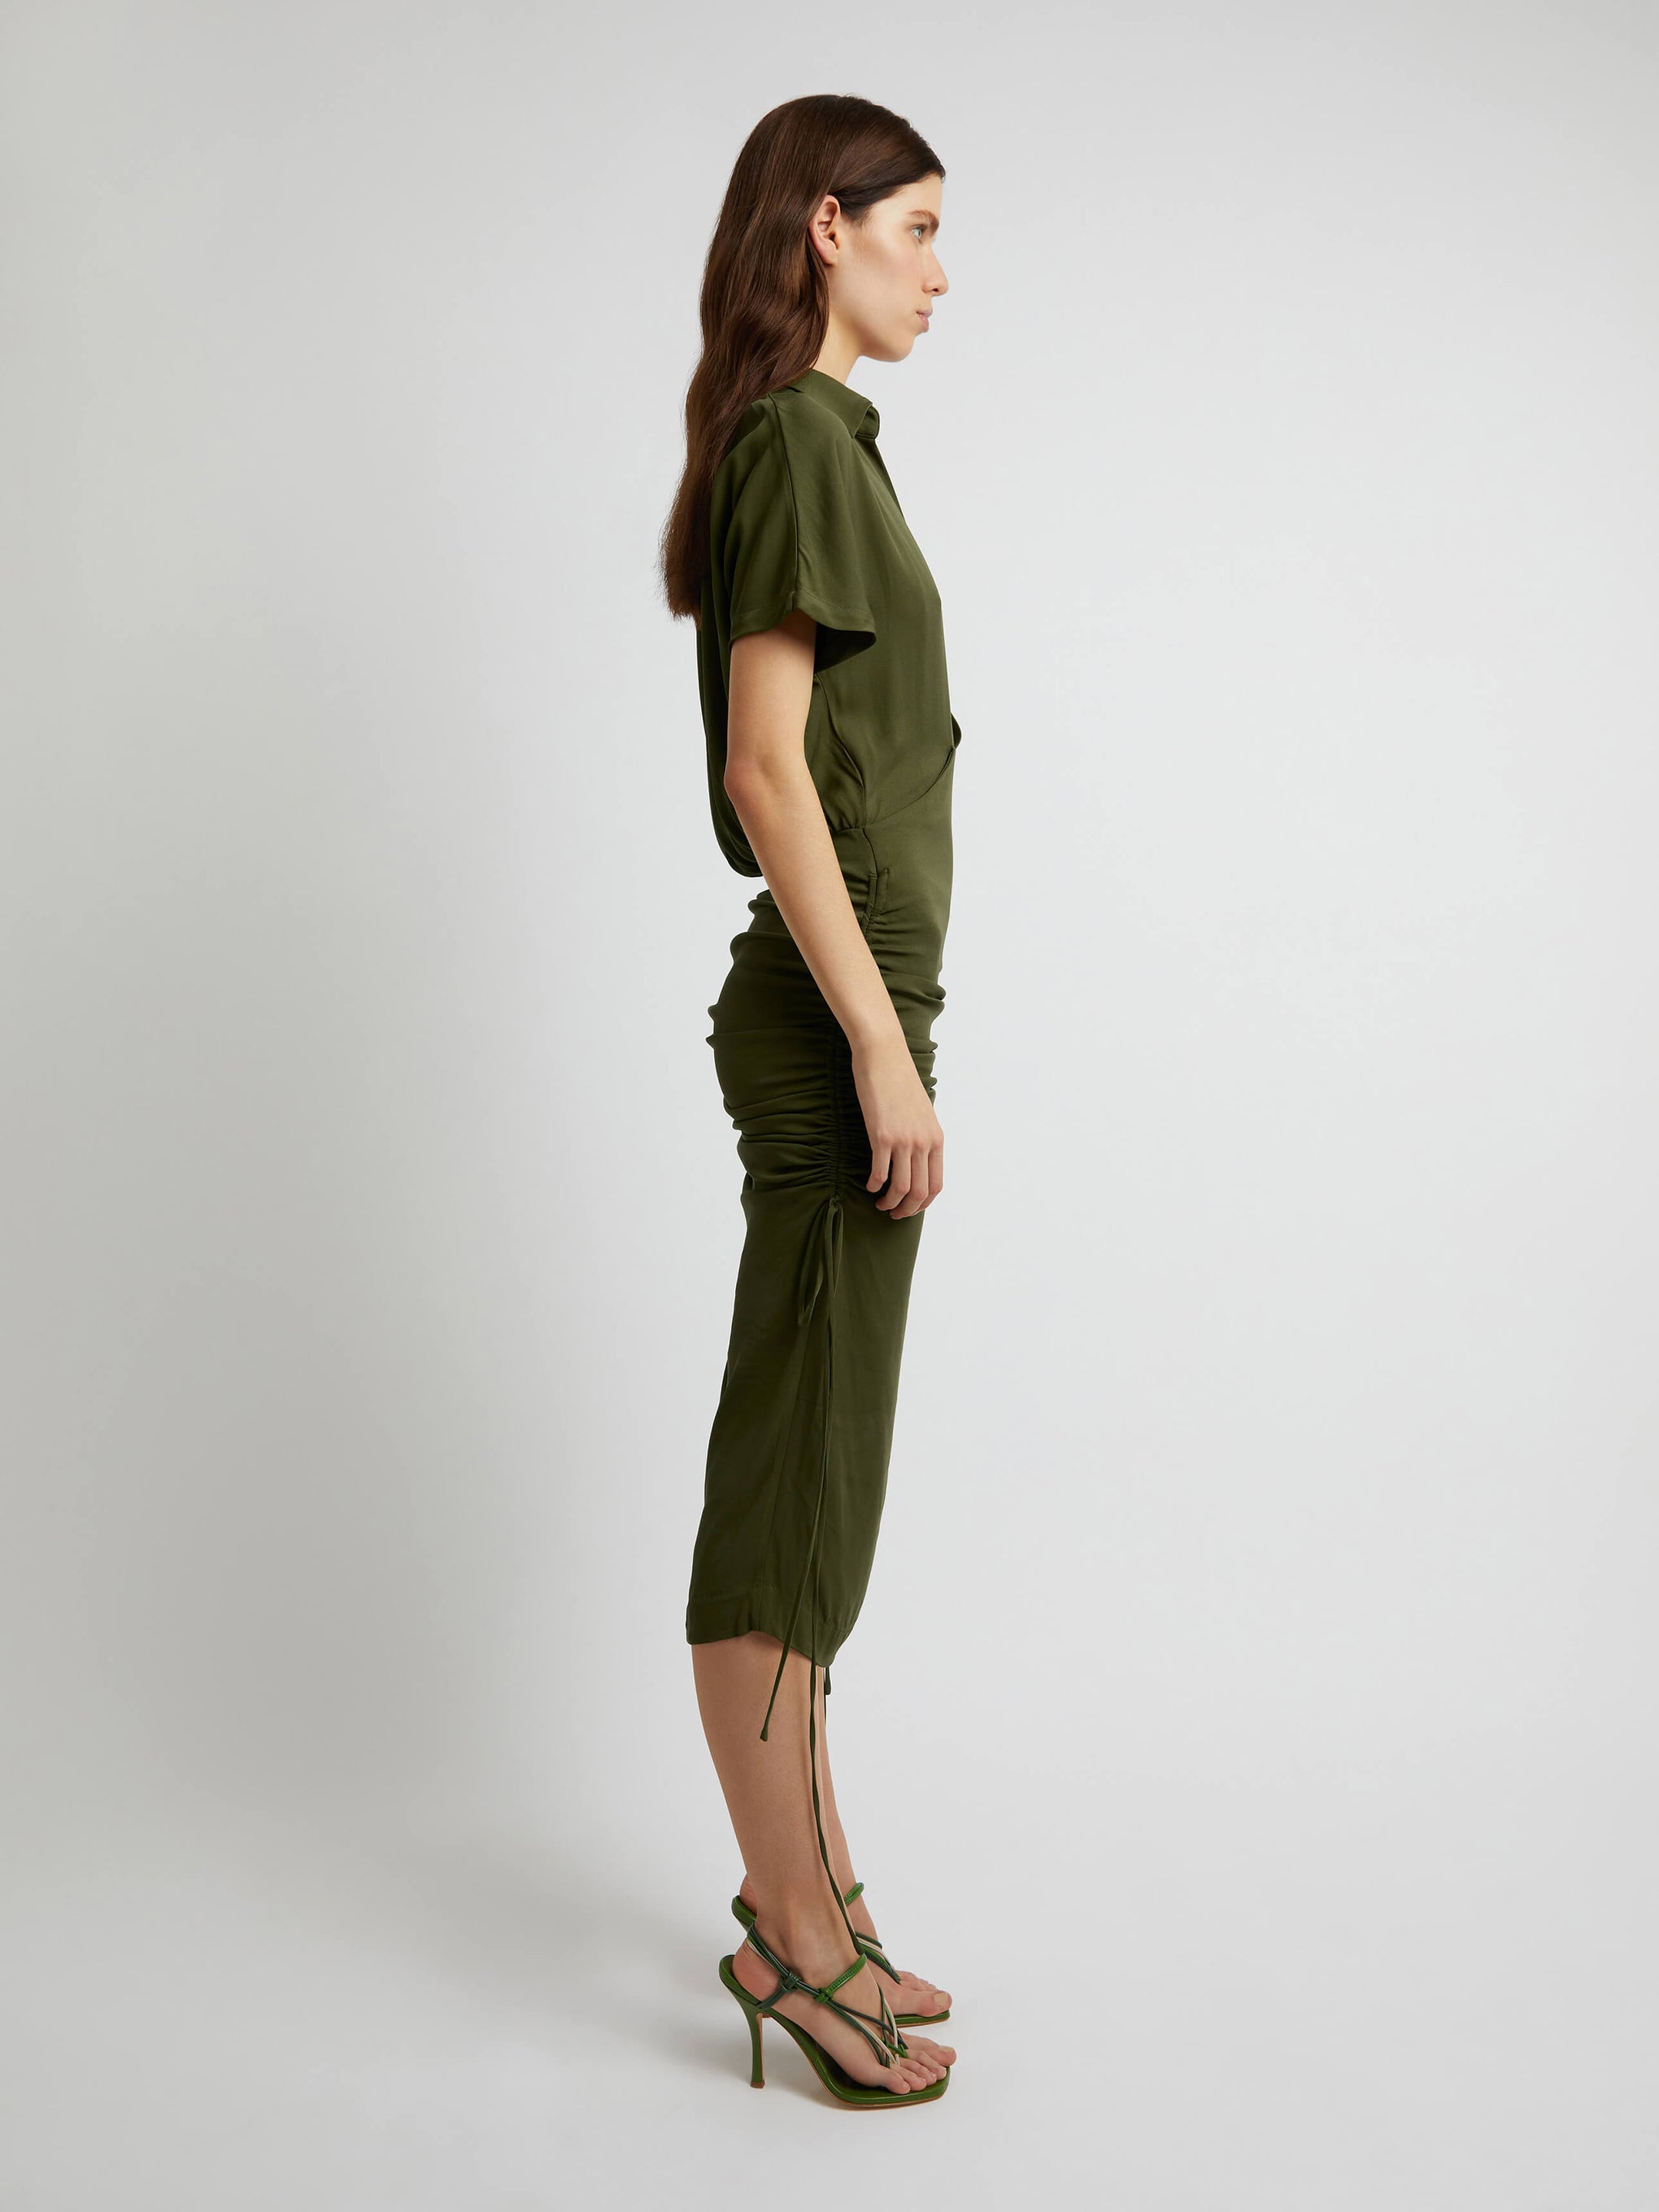 Christopher Esber Aulenti Column Shirt Dress in Moss available at TNT The New Trend.